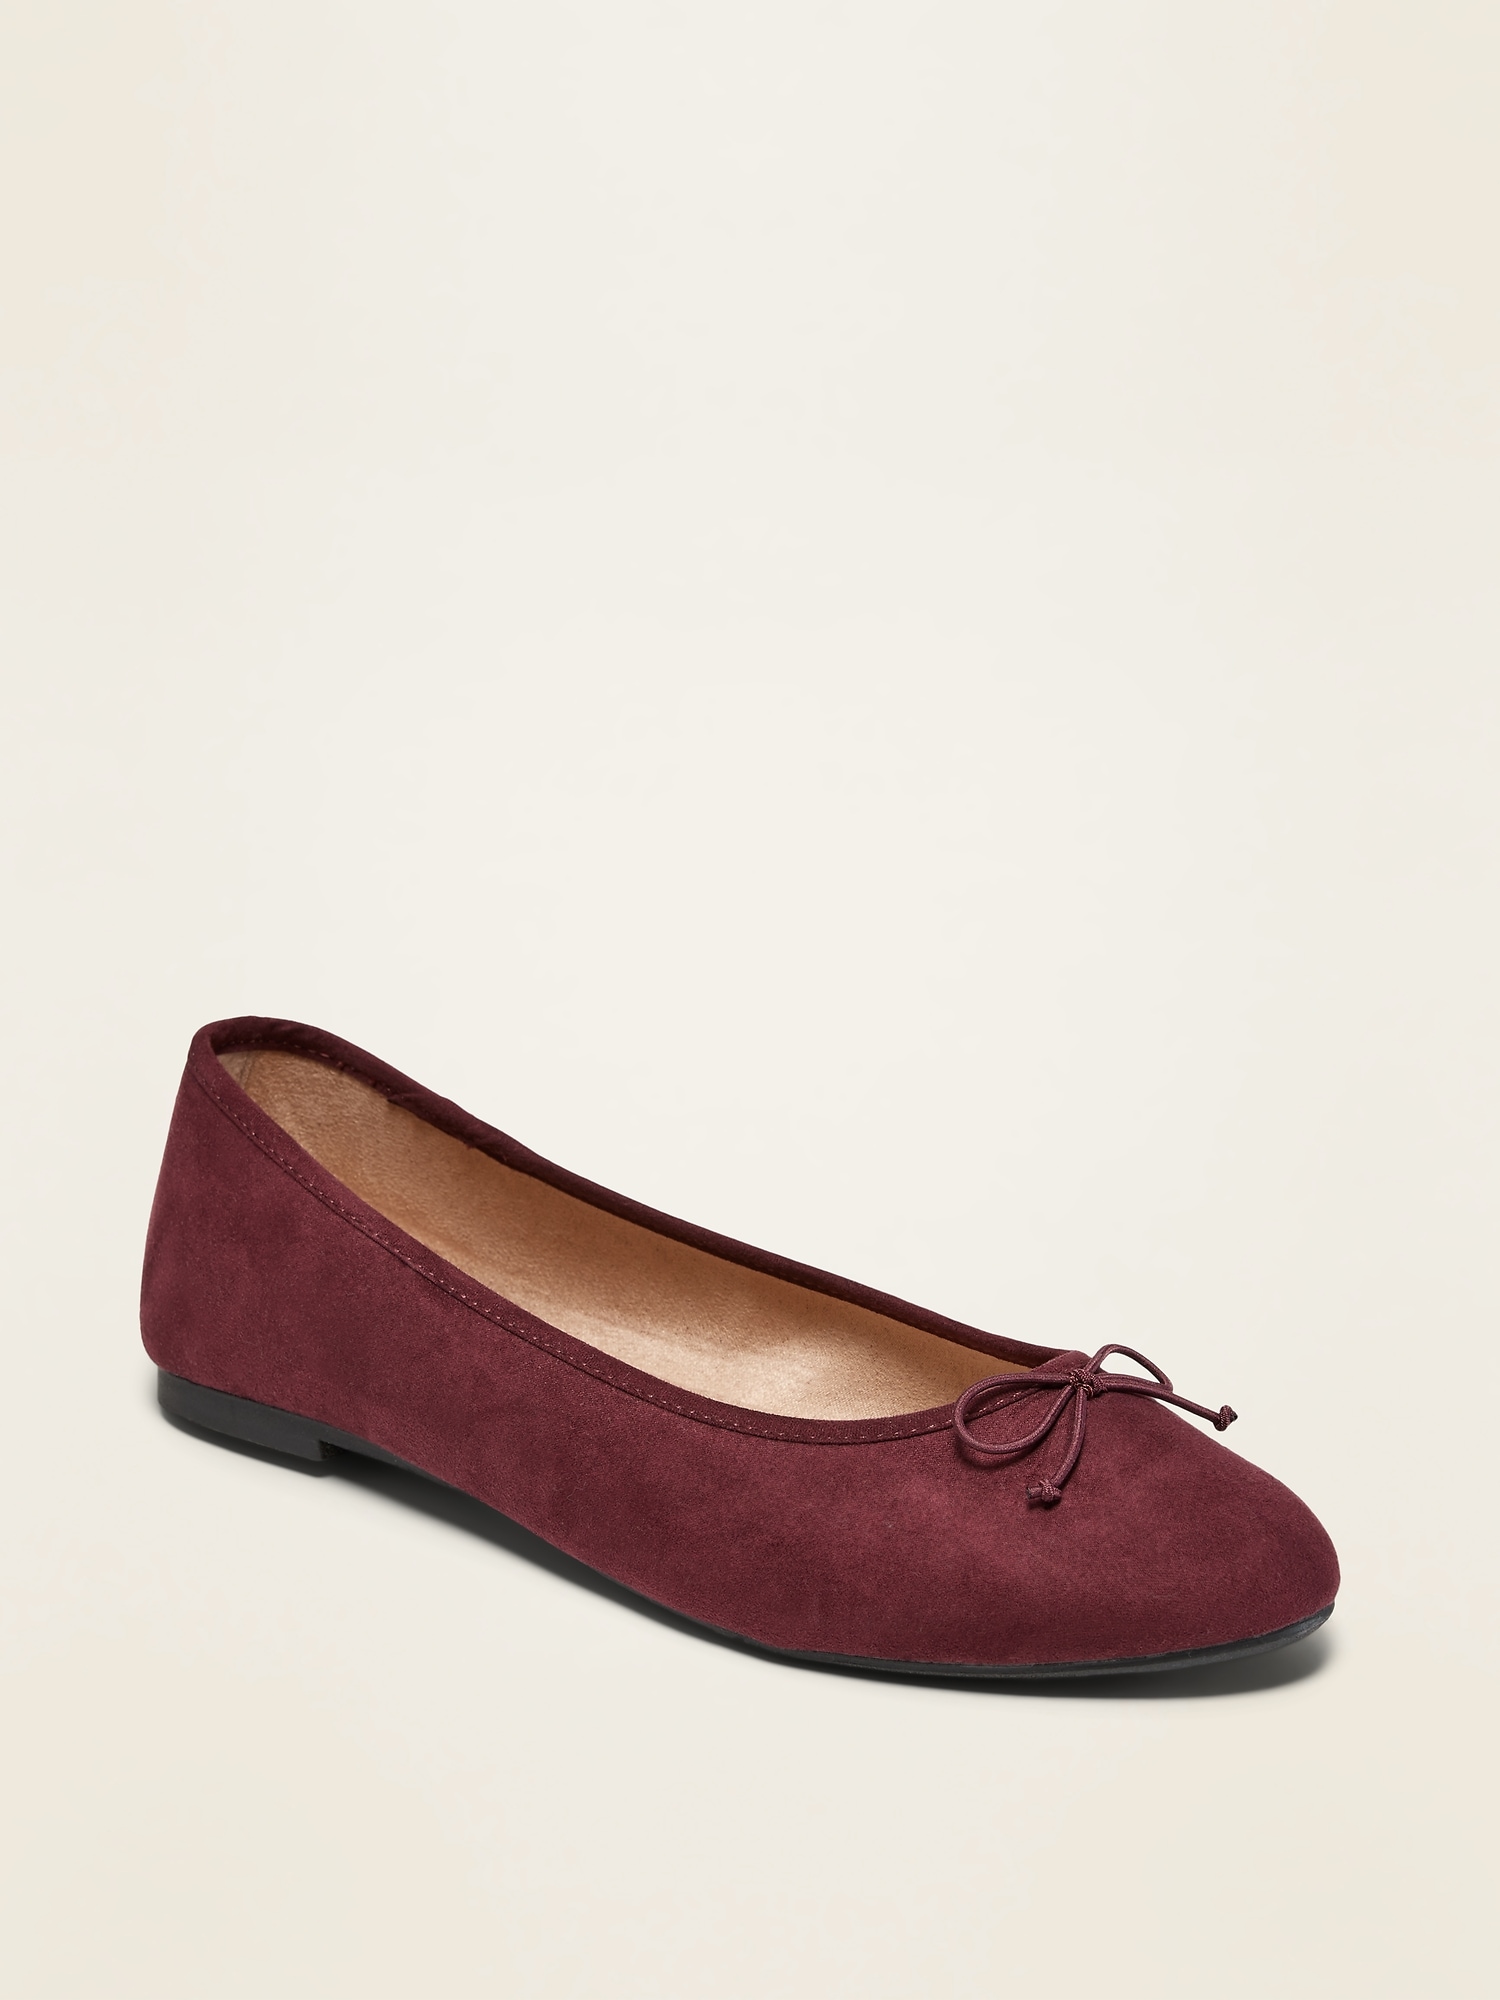 old navy faux suede shoes